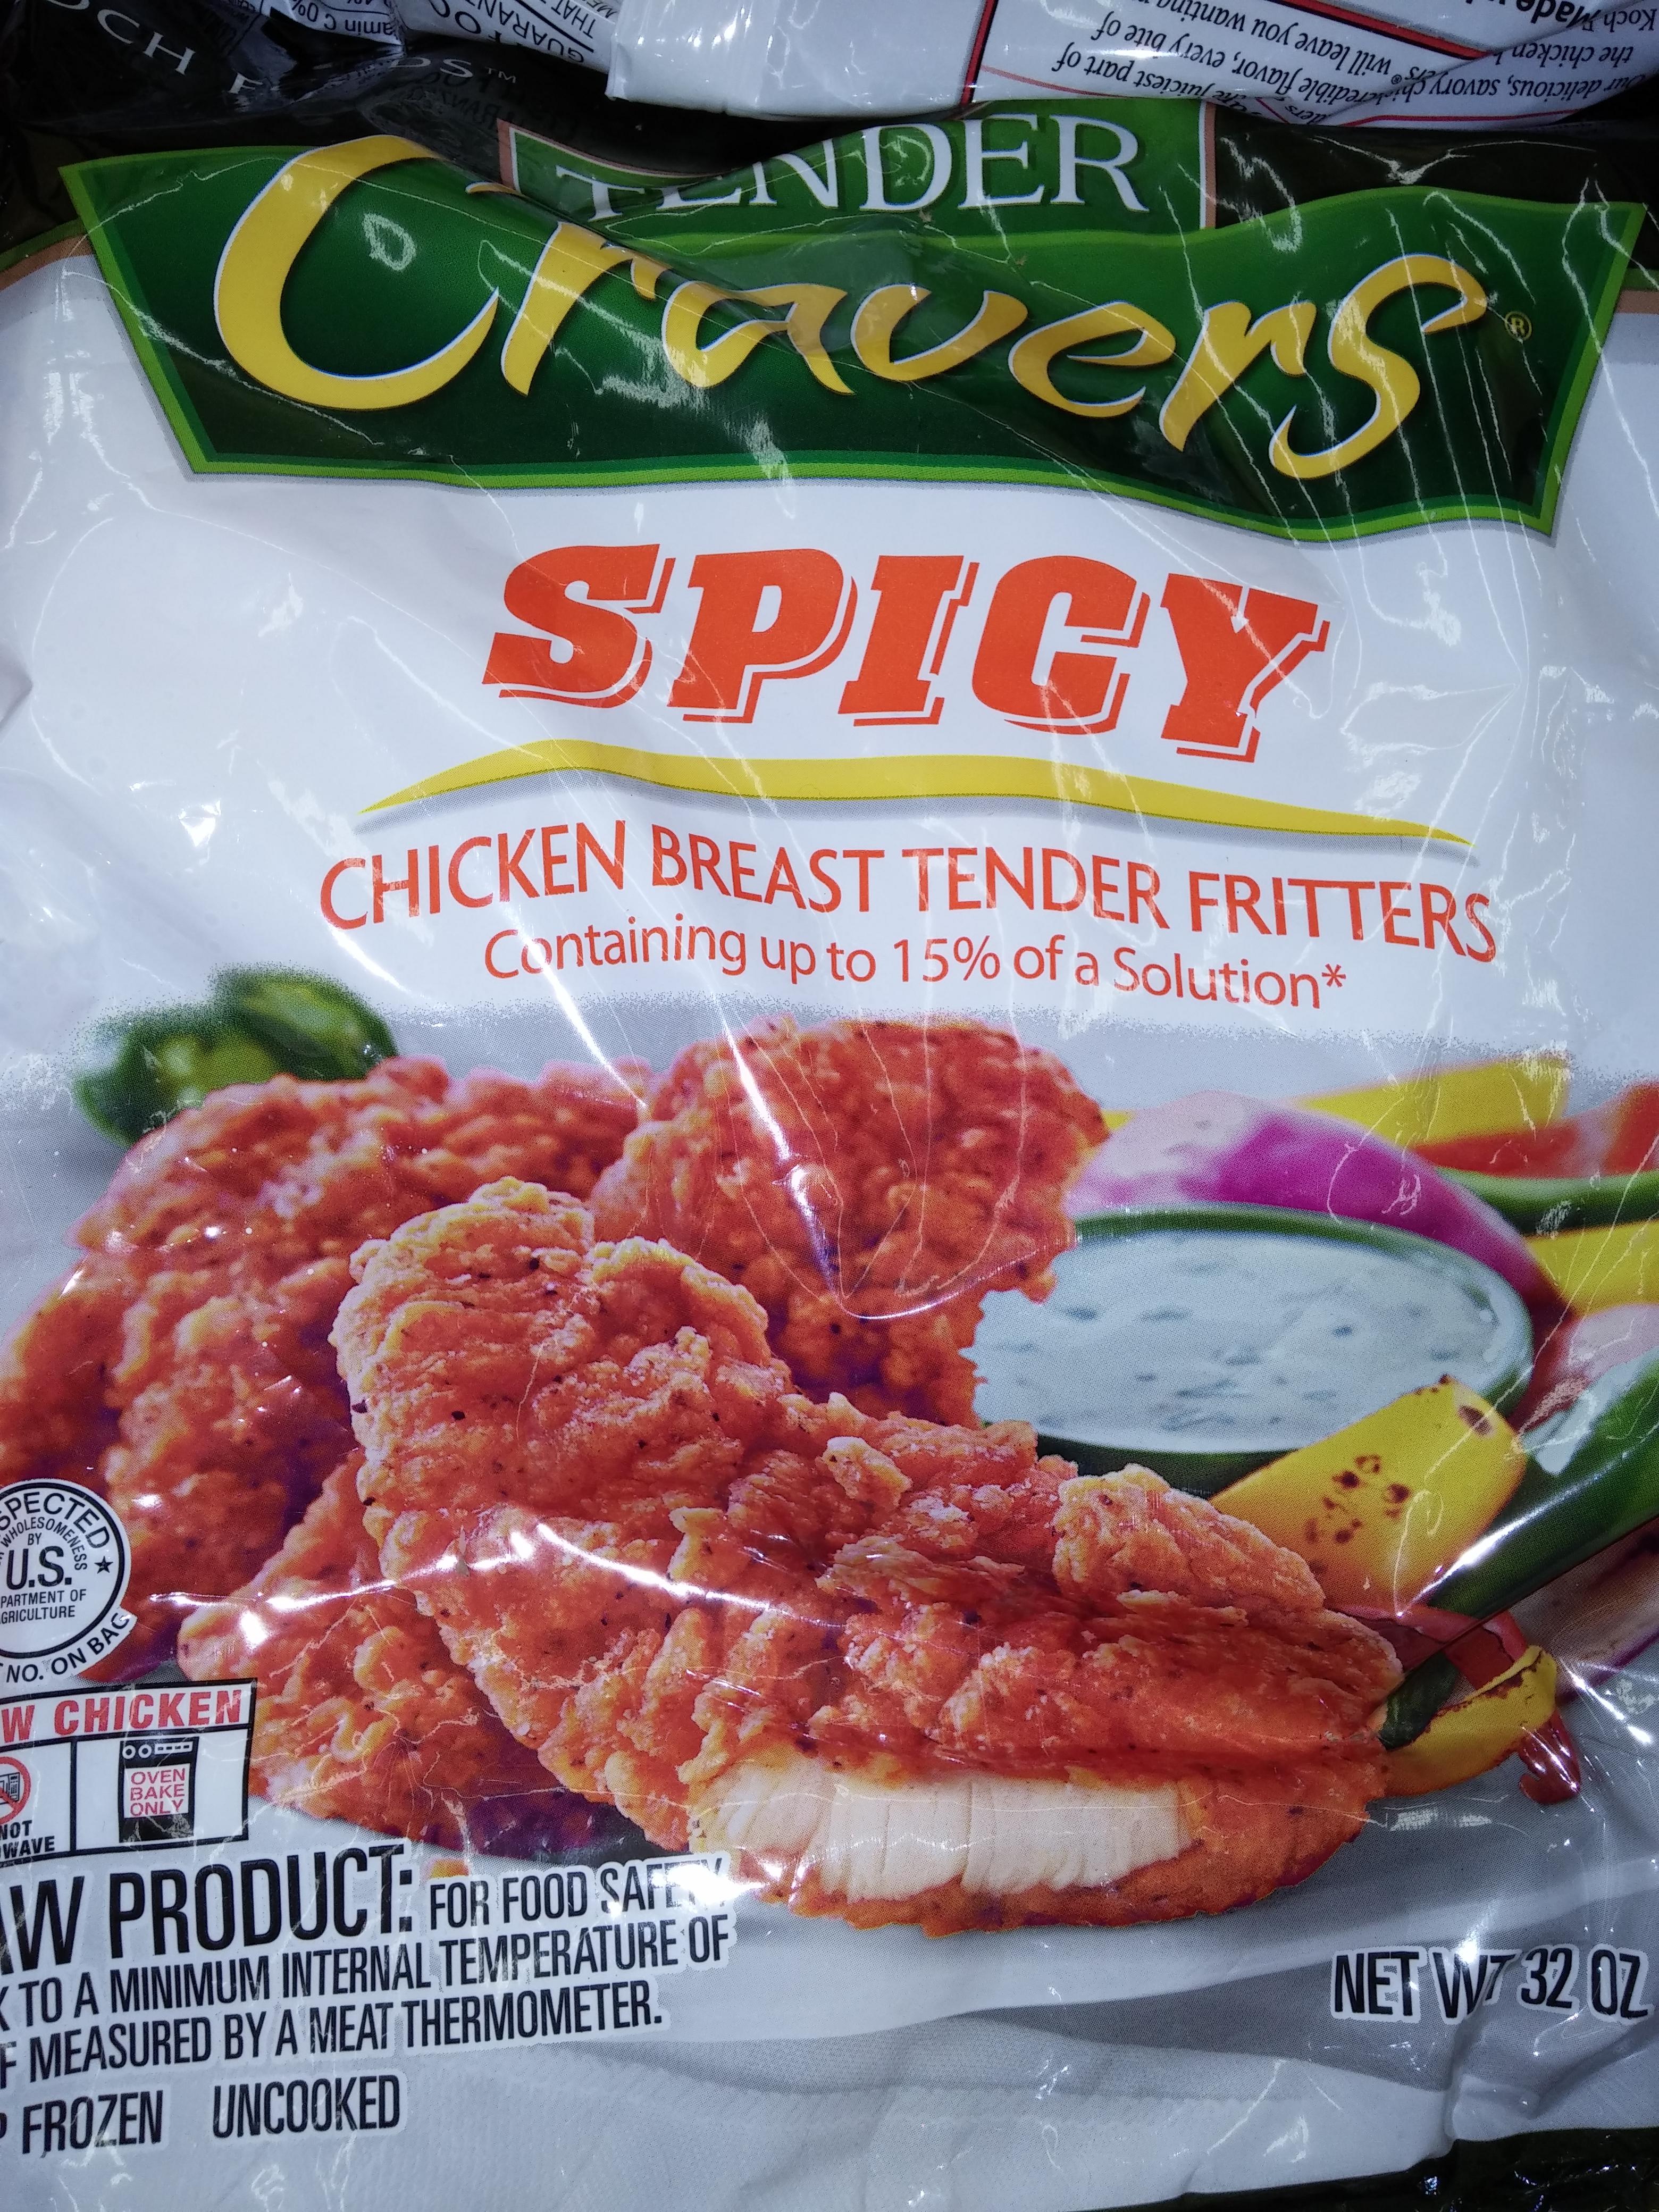 These chicken strips contain 15% of "some solution".